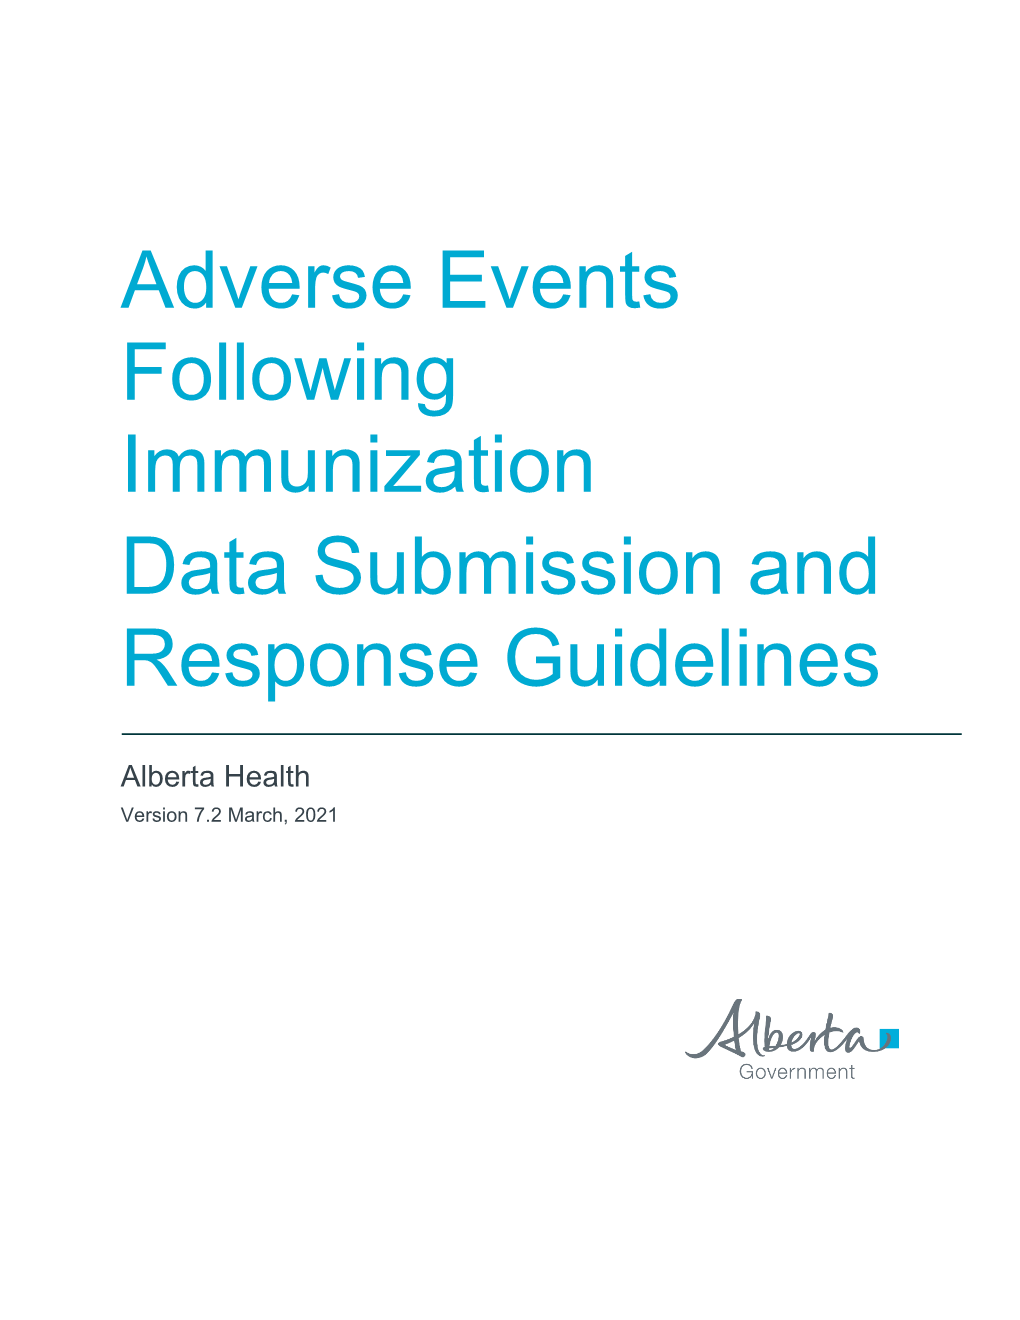 Adverse Events Following Immunization Data Submission and Response Guidelines